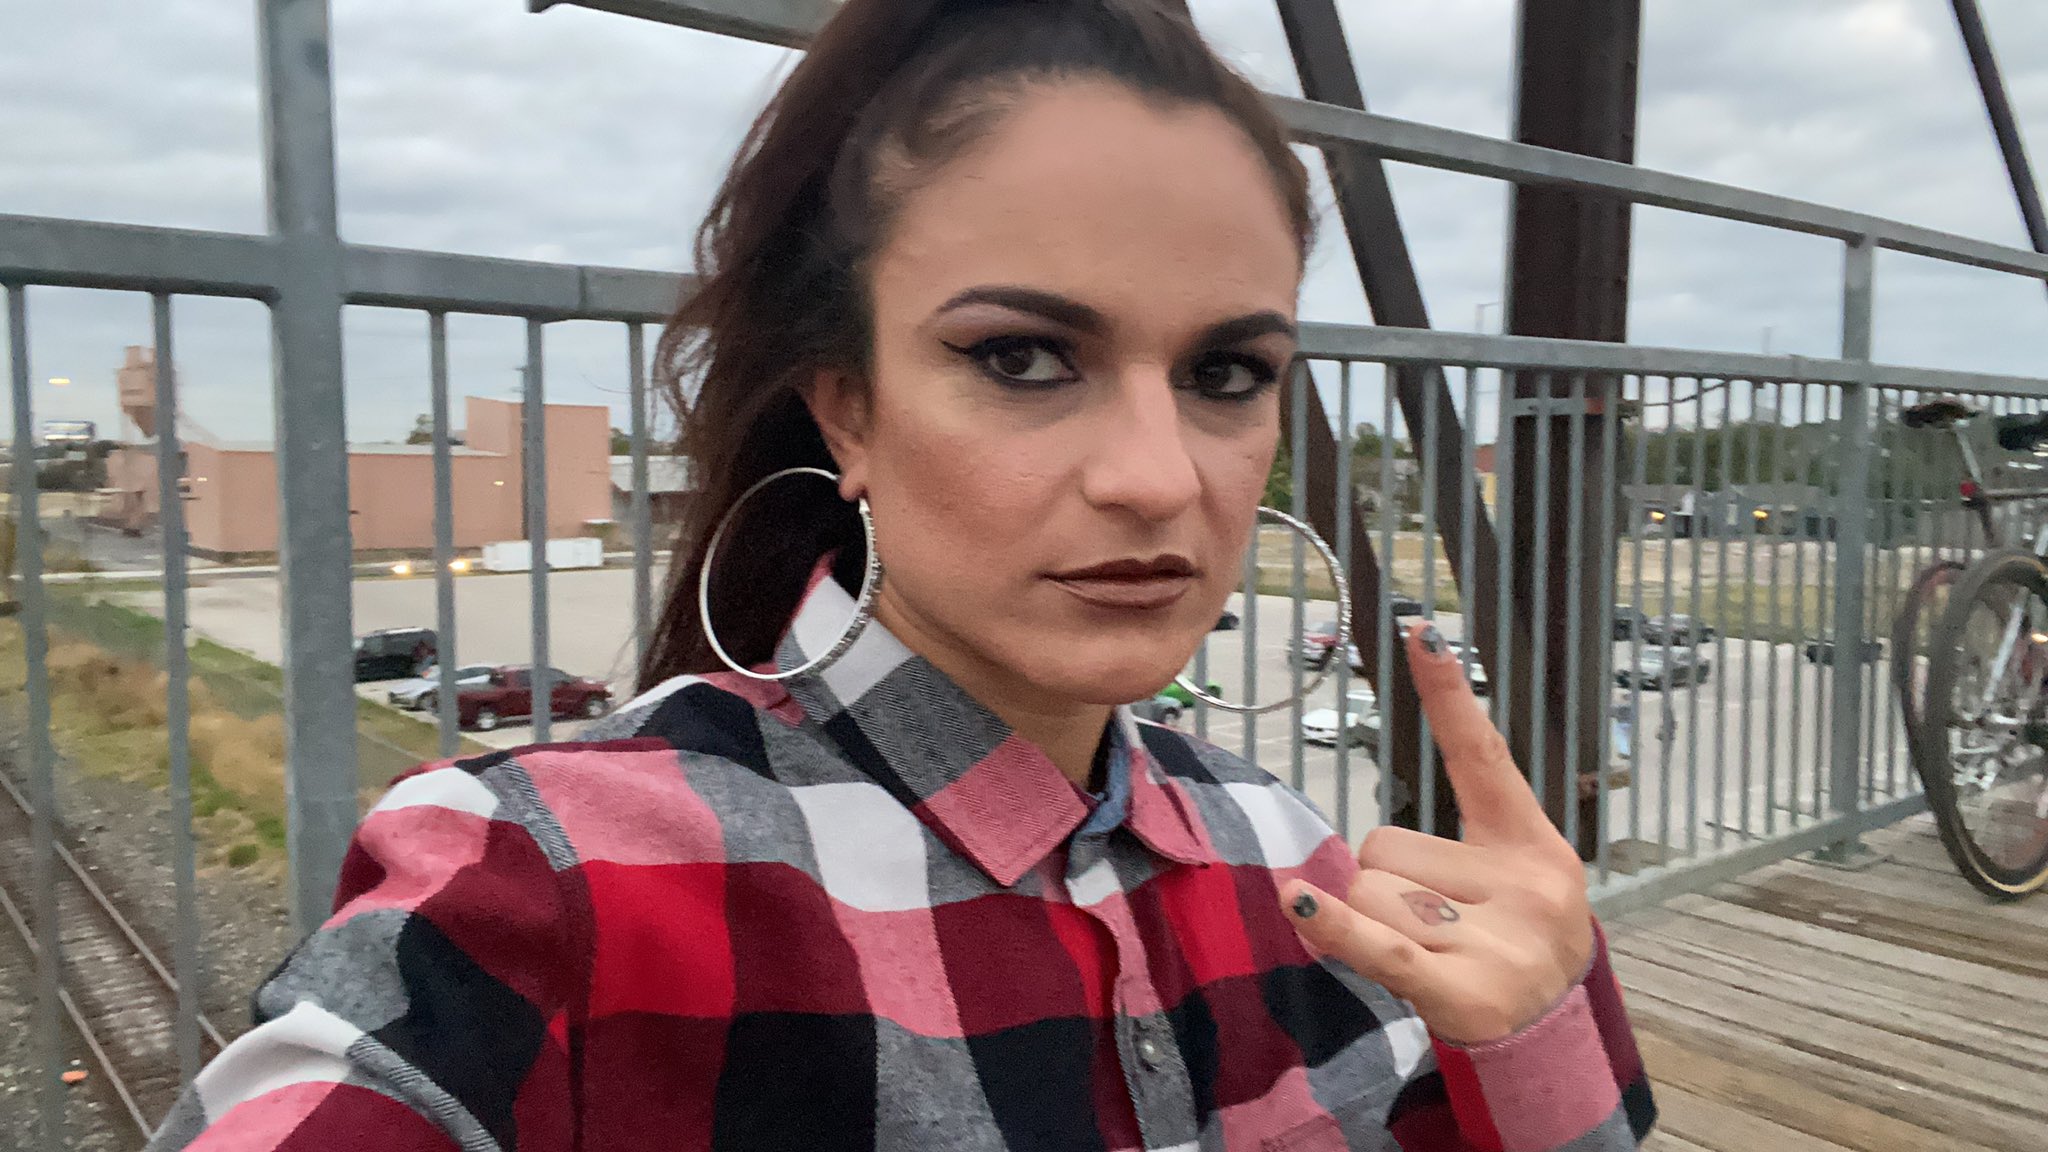 Thunder Rosa seems set to either join AEW or WWE